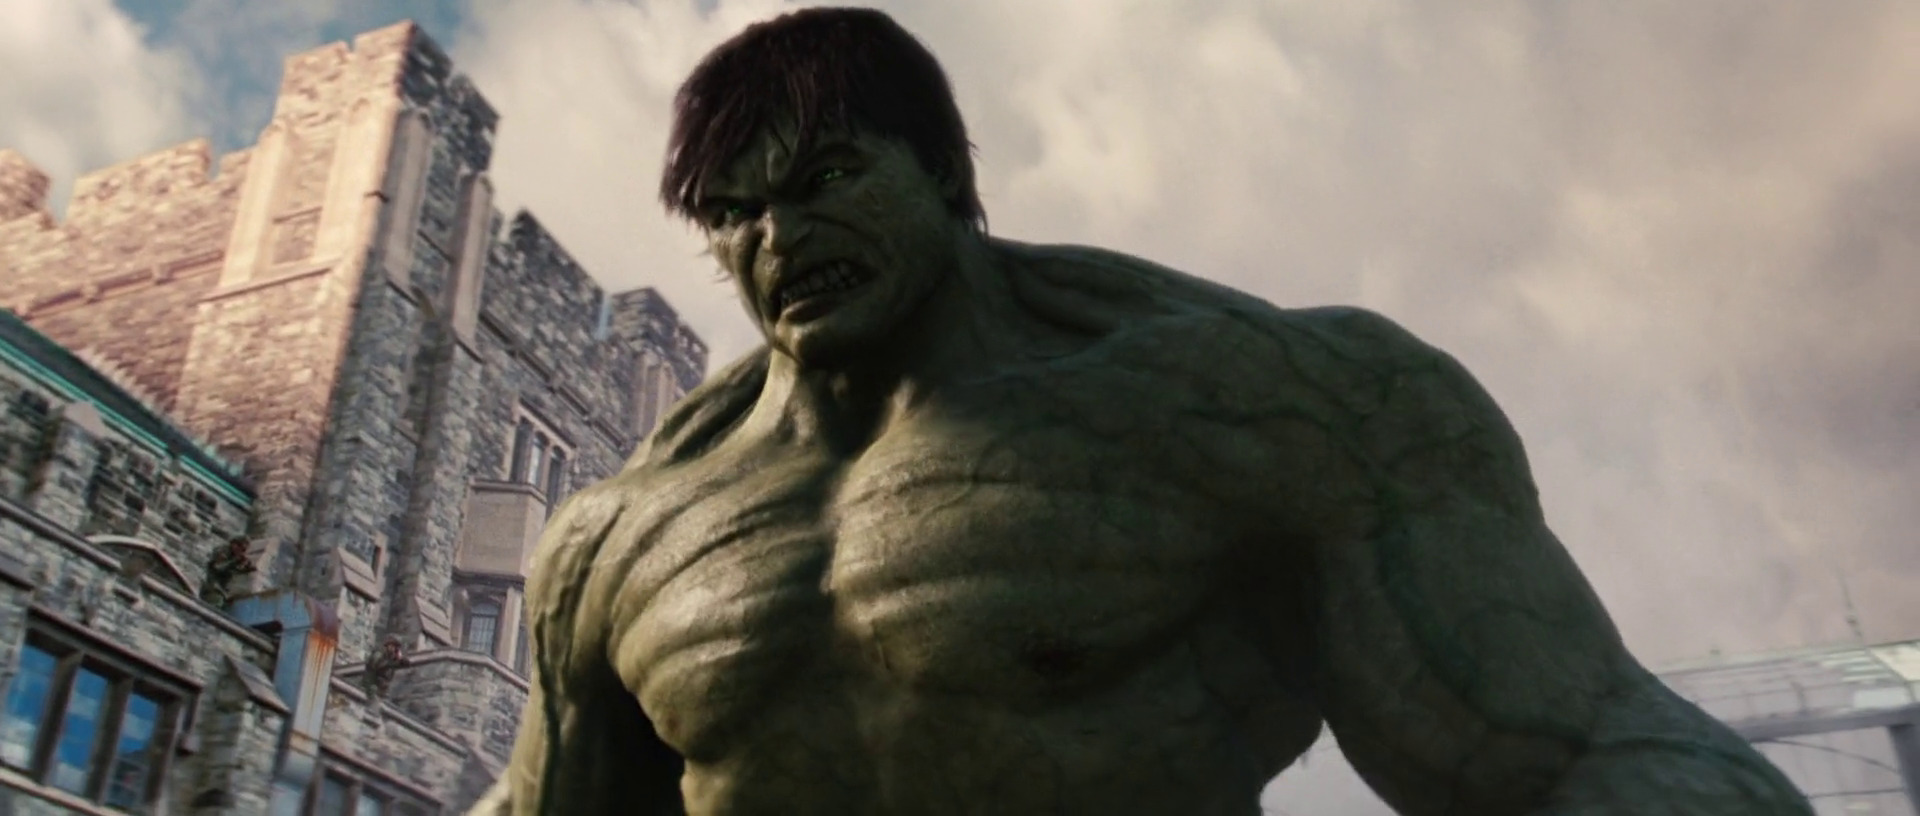 Bruce Banner (Edward Norton) reveals himself as the Jade Giant in The Incredible Hulk (2008), Marvel Entertainment/Universal Pictures